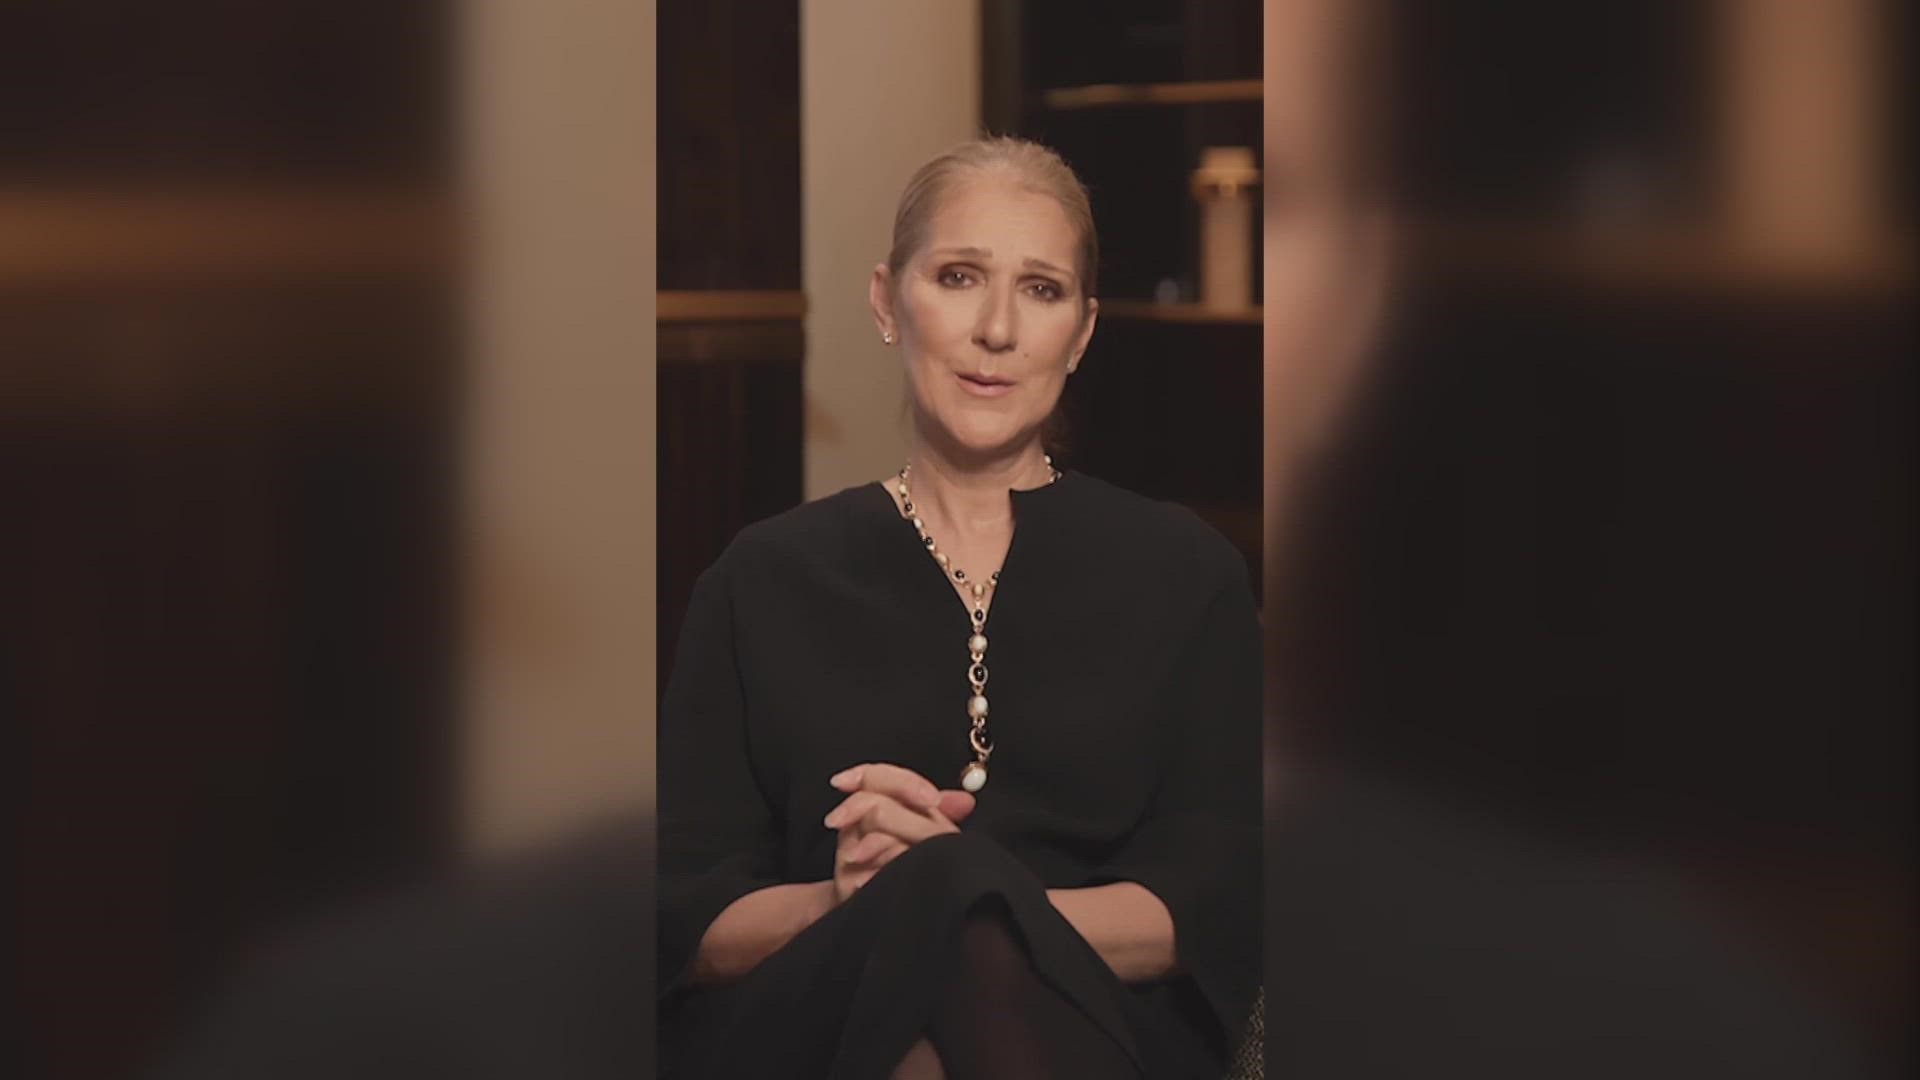 One of the all-time greats, Celine Dion, recently revealed she has been diagnosed with a rare and incurable neurological disorder called stiff-person syndrome.